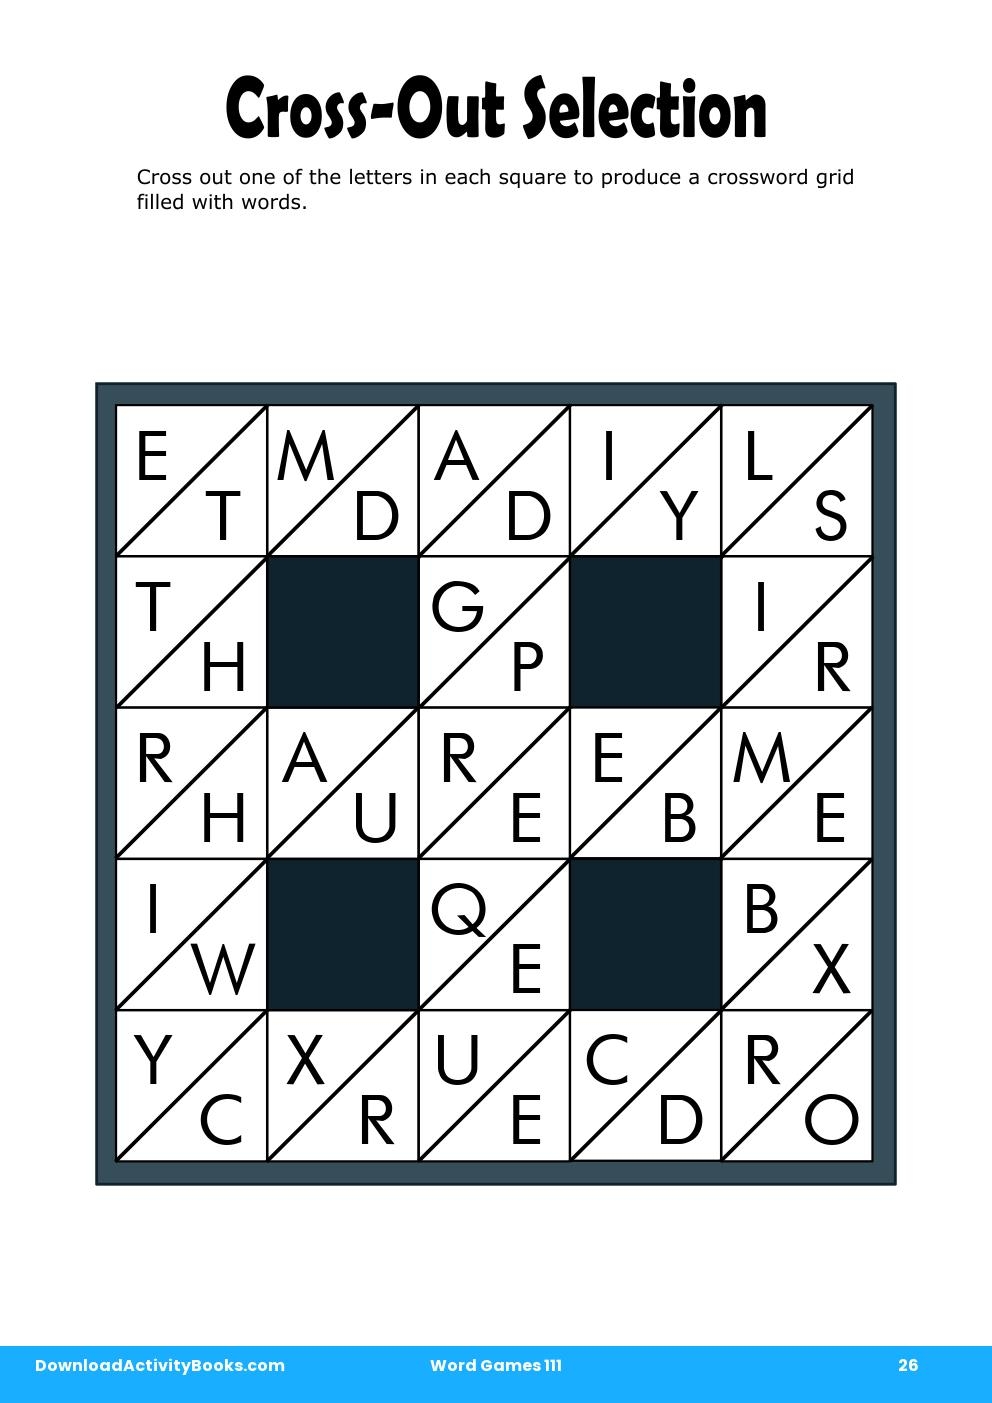 Cross-Out Selection in Word Games 111